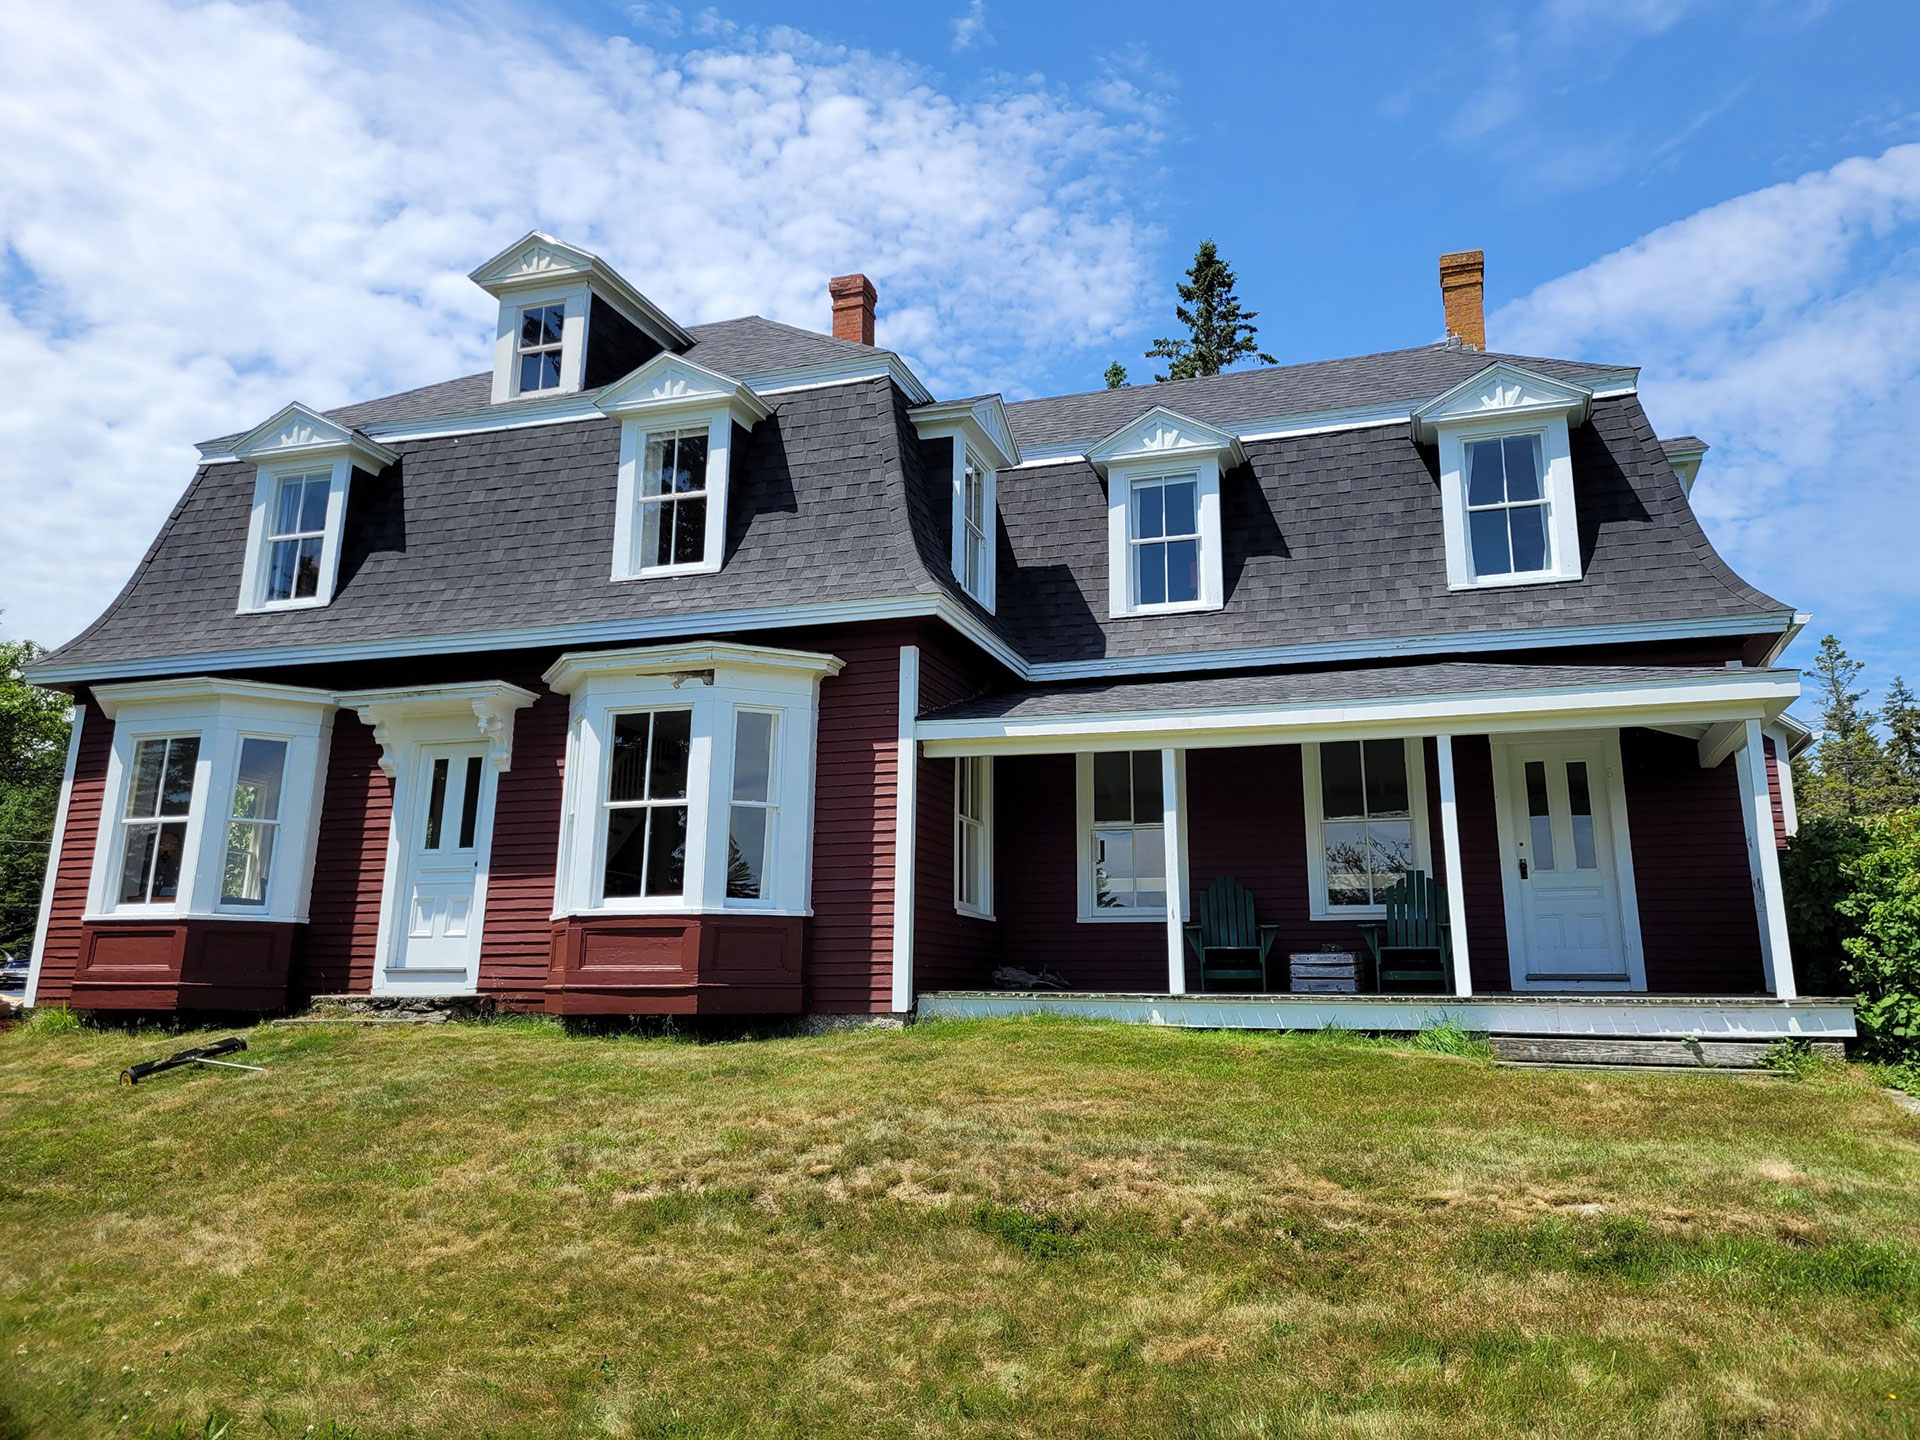 expertise-based asphalt roofing installation contractors in south portland and coastal maine